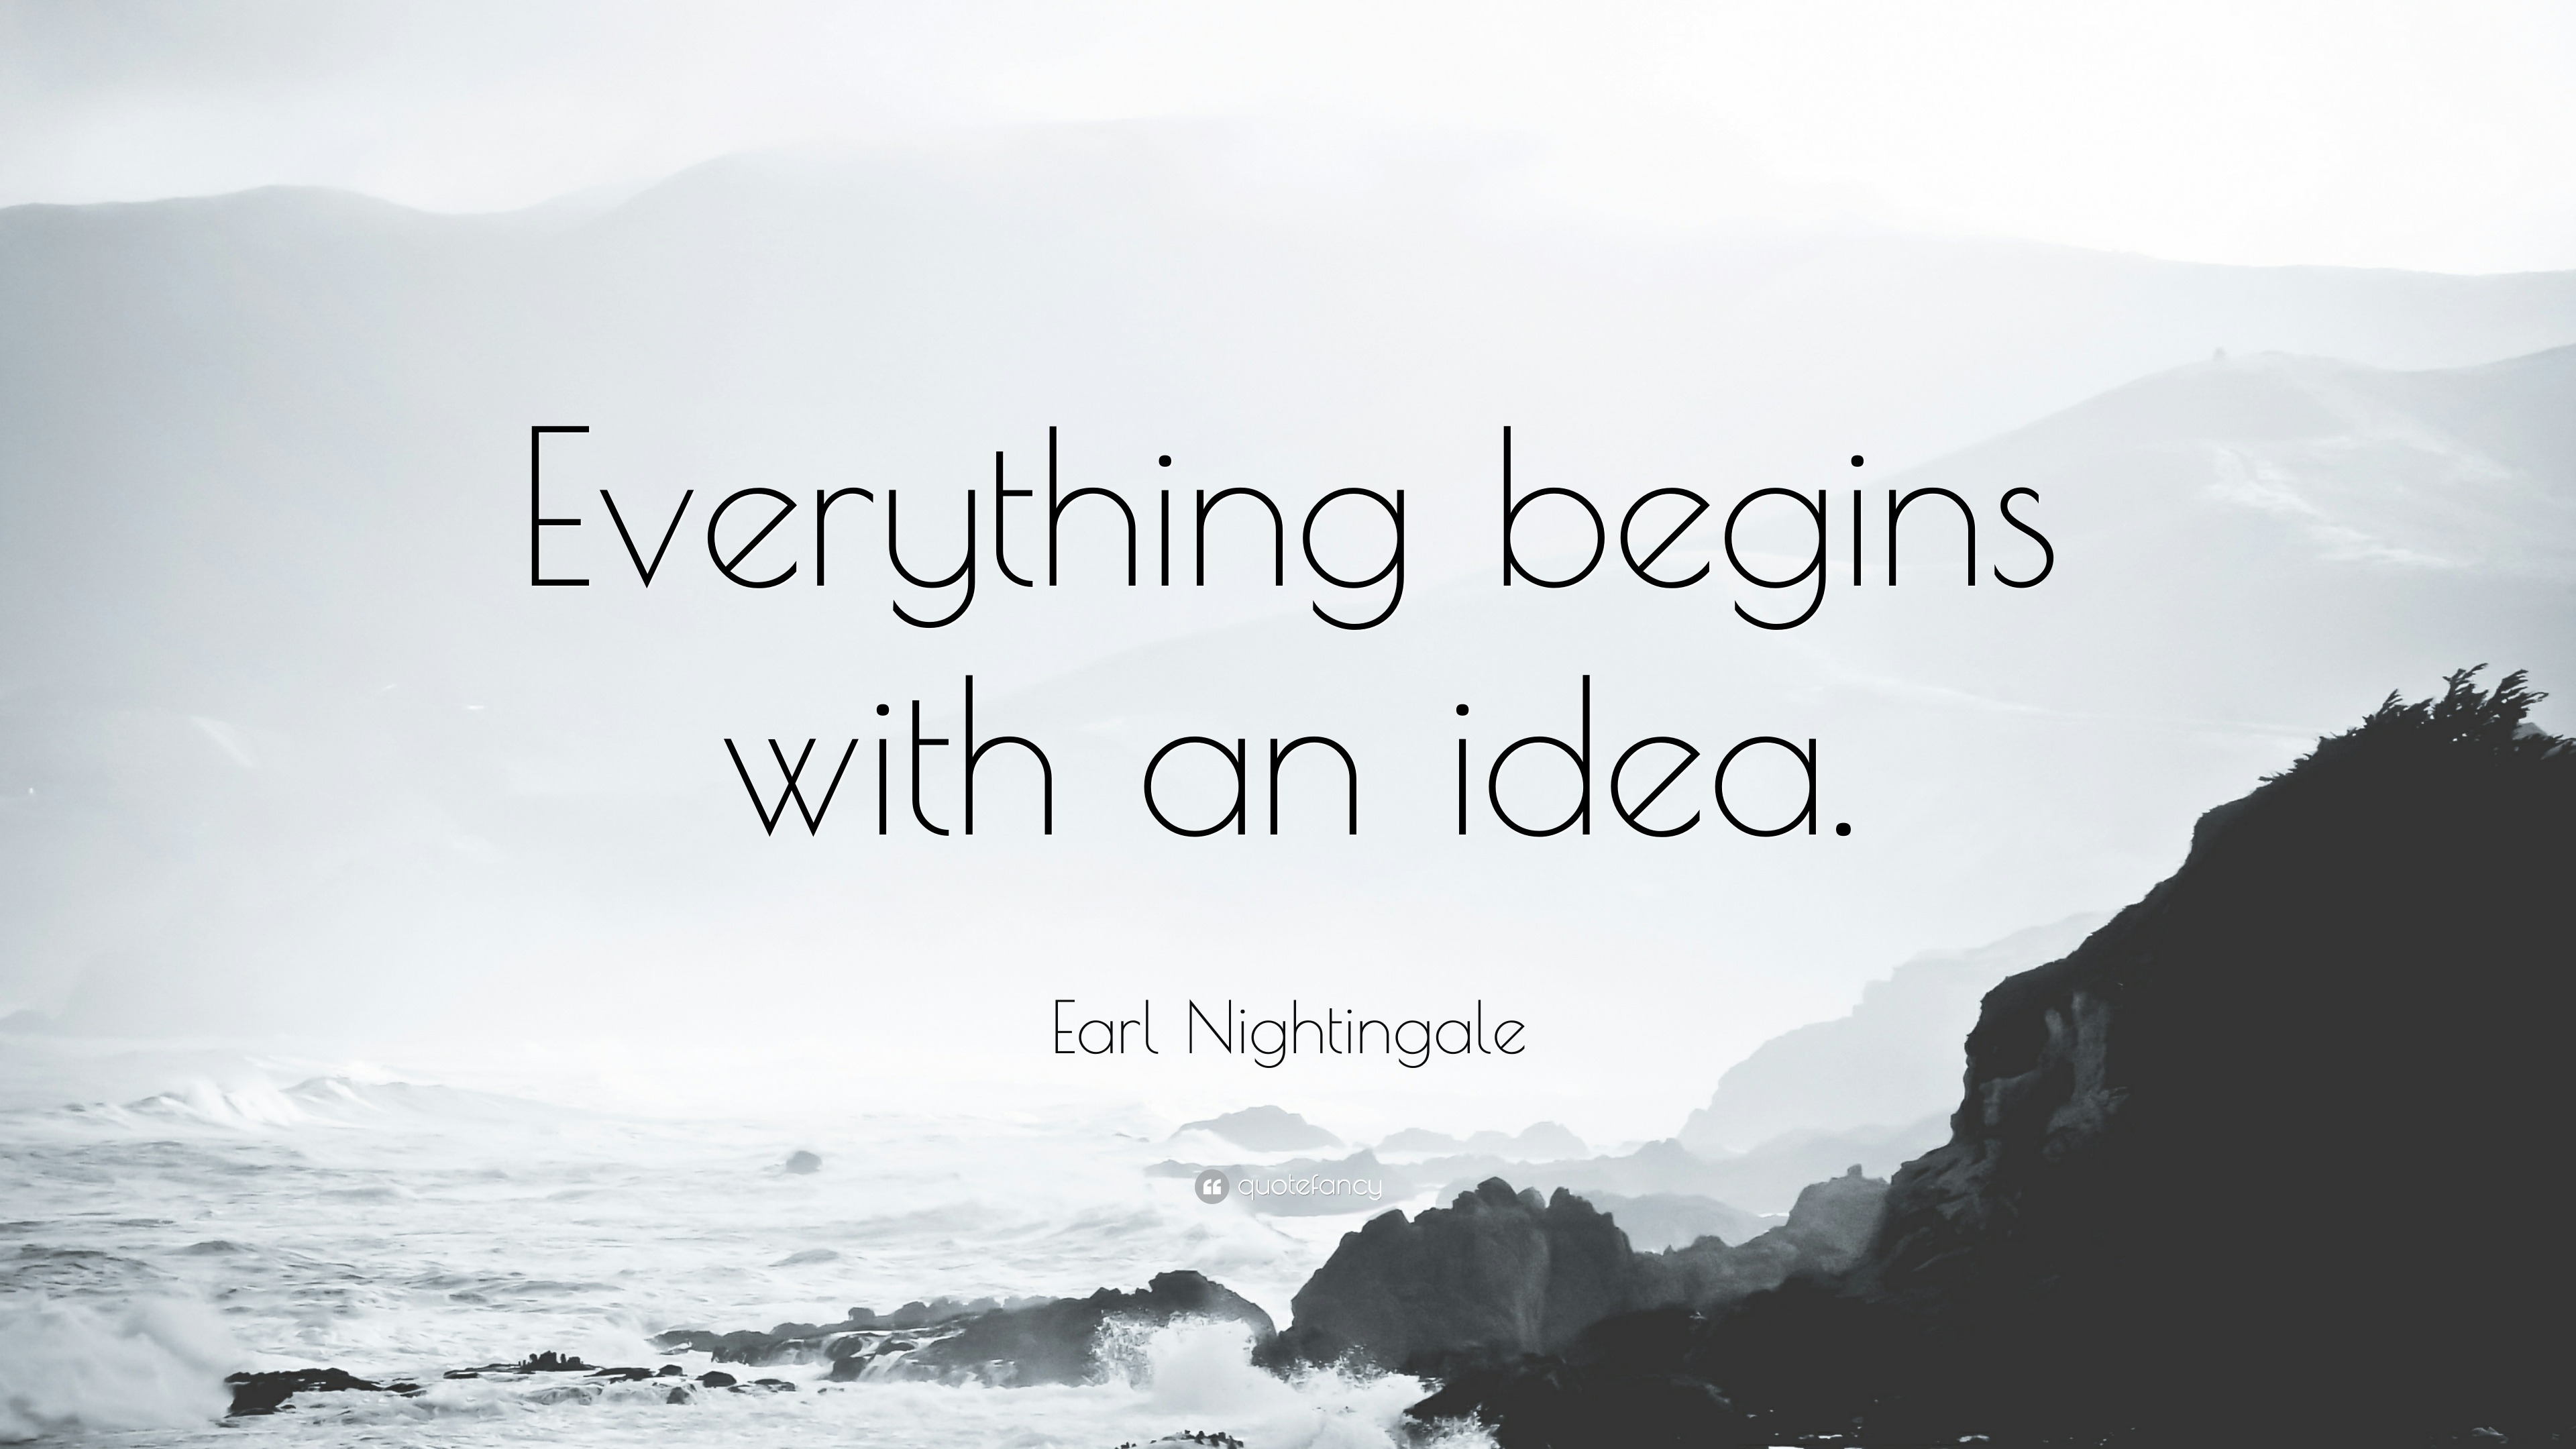 Everything begins with an idea; a simple idea can inspire